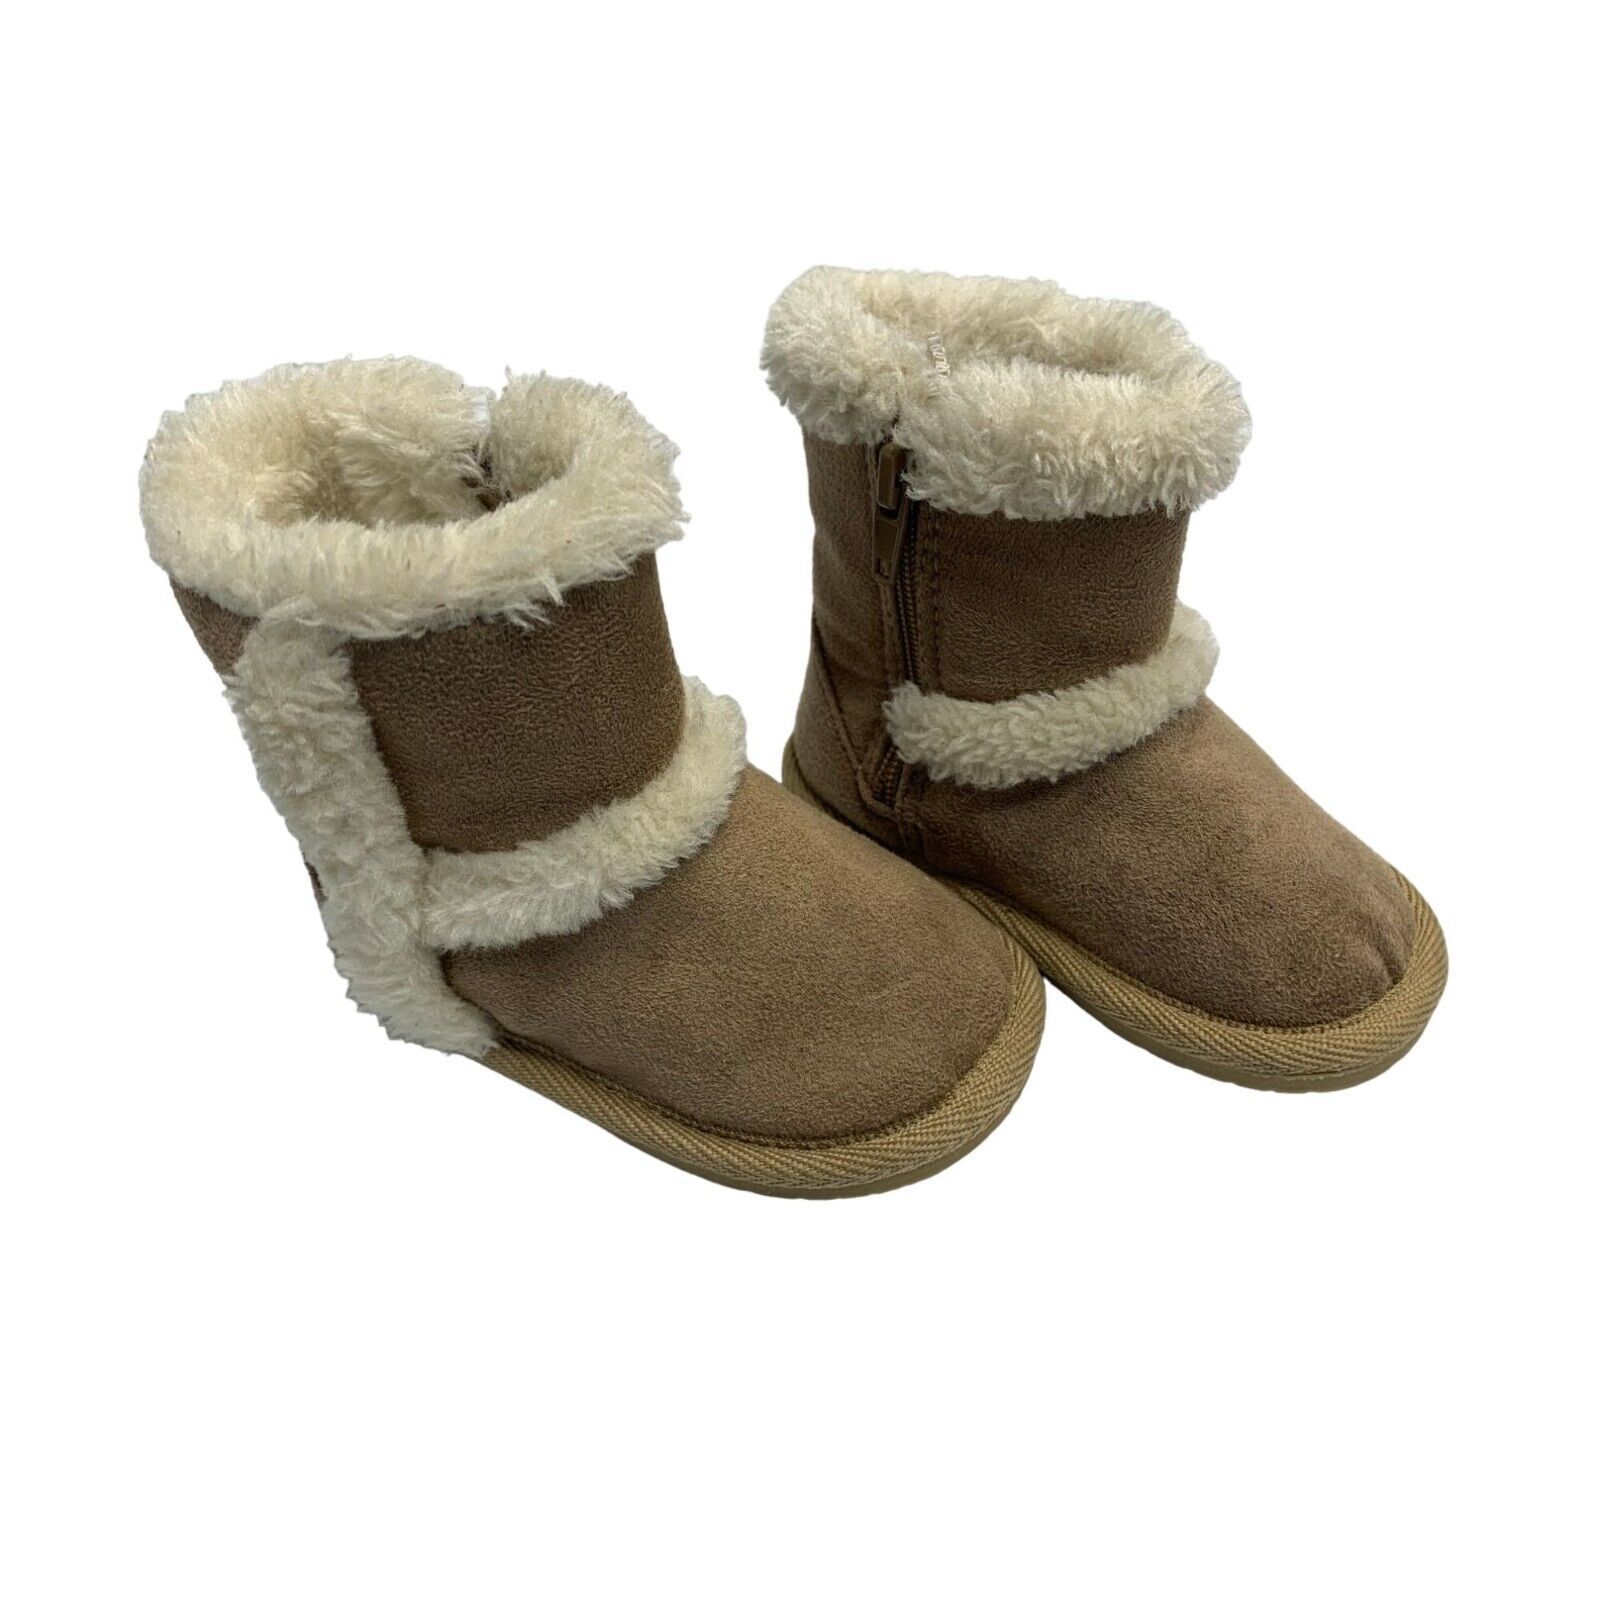 Teeny Toes Girls Infant Baby Size 3 Zip SIde Faux Suede Ankle Boots Bootie Tan F - $11.87